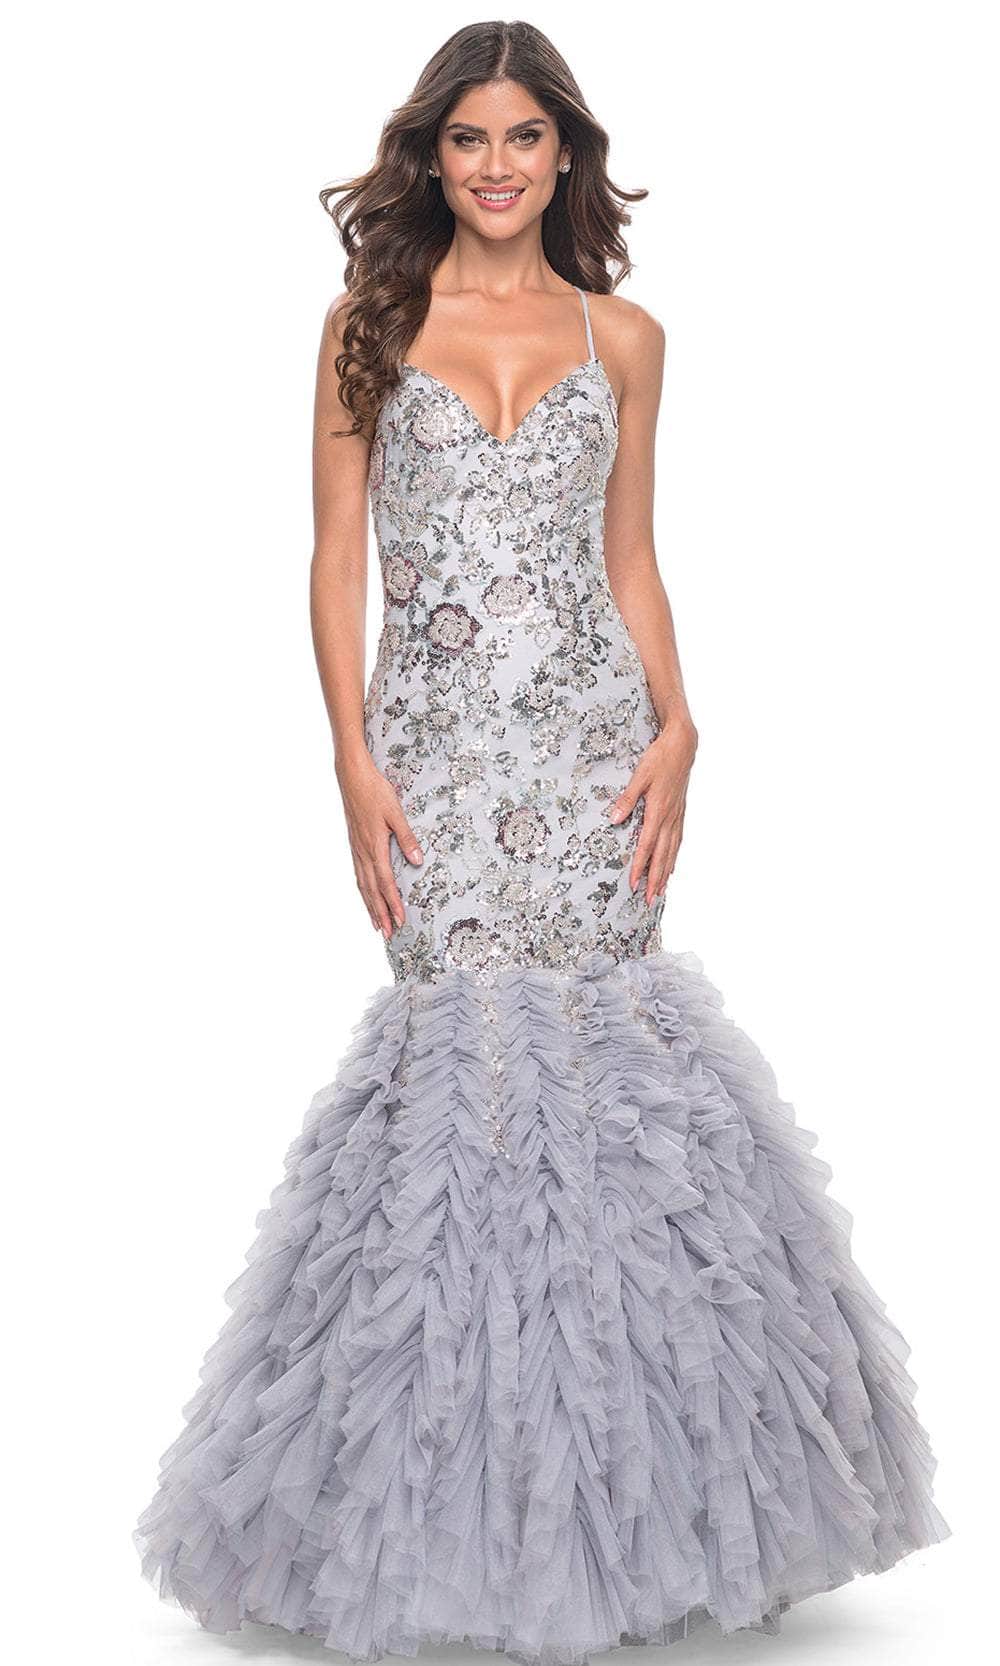 La Femme 32105 - Beaded Sleeveless Prom Gown Prom Dresses 00 / Silver